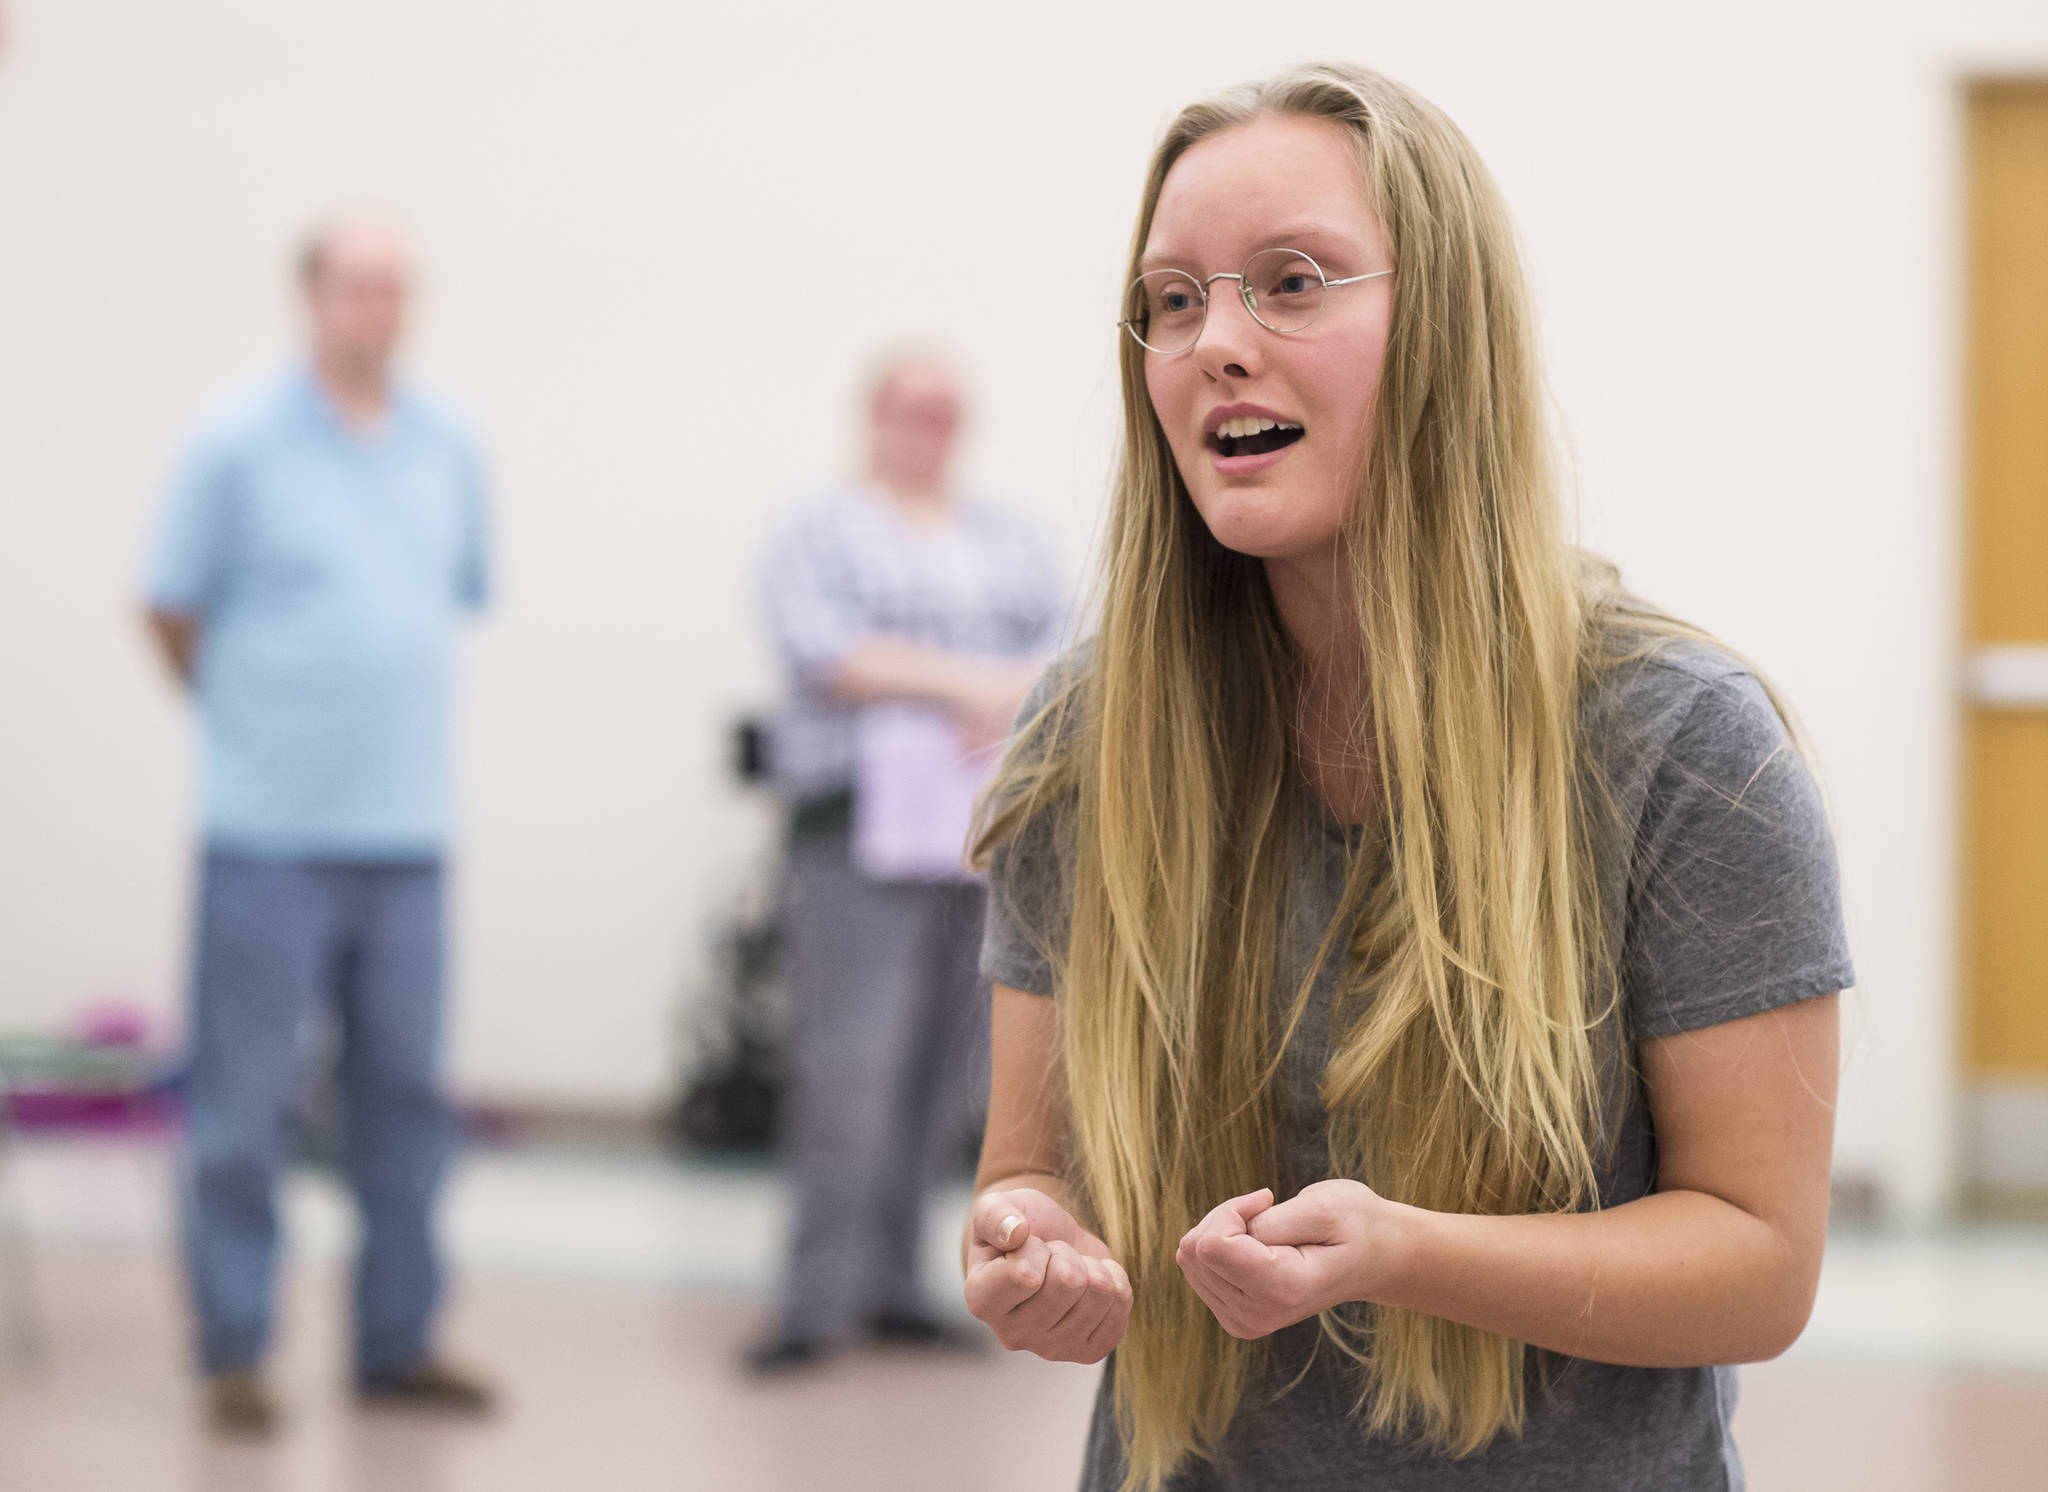 Abigail Zahasky, playing teacher Miss Honey, sings during rehearsal of Theater at Latitude 58’s production of “Matilda” at St. Ann’s Parish Hall on Friday, Nov. 9, 2018. (Michael Penn | Capital City Weekly)